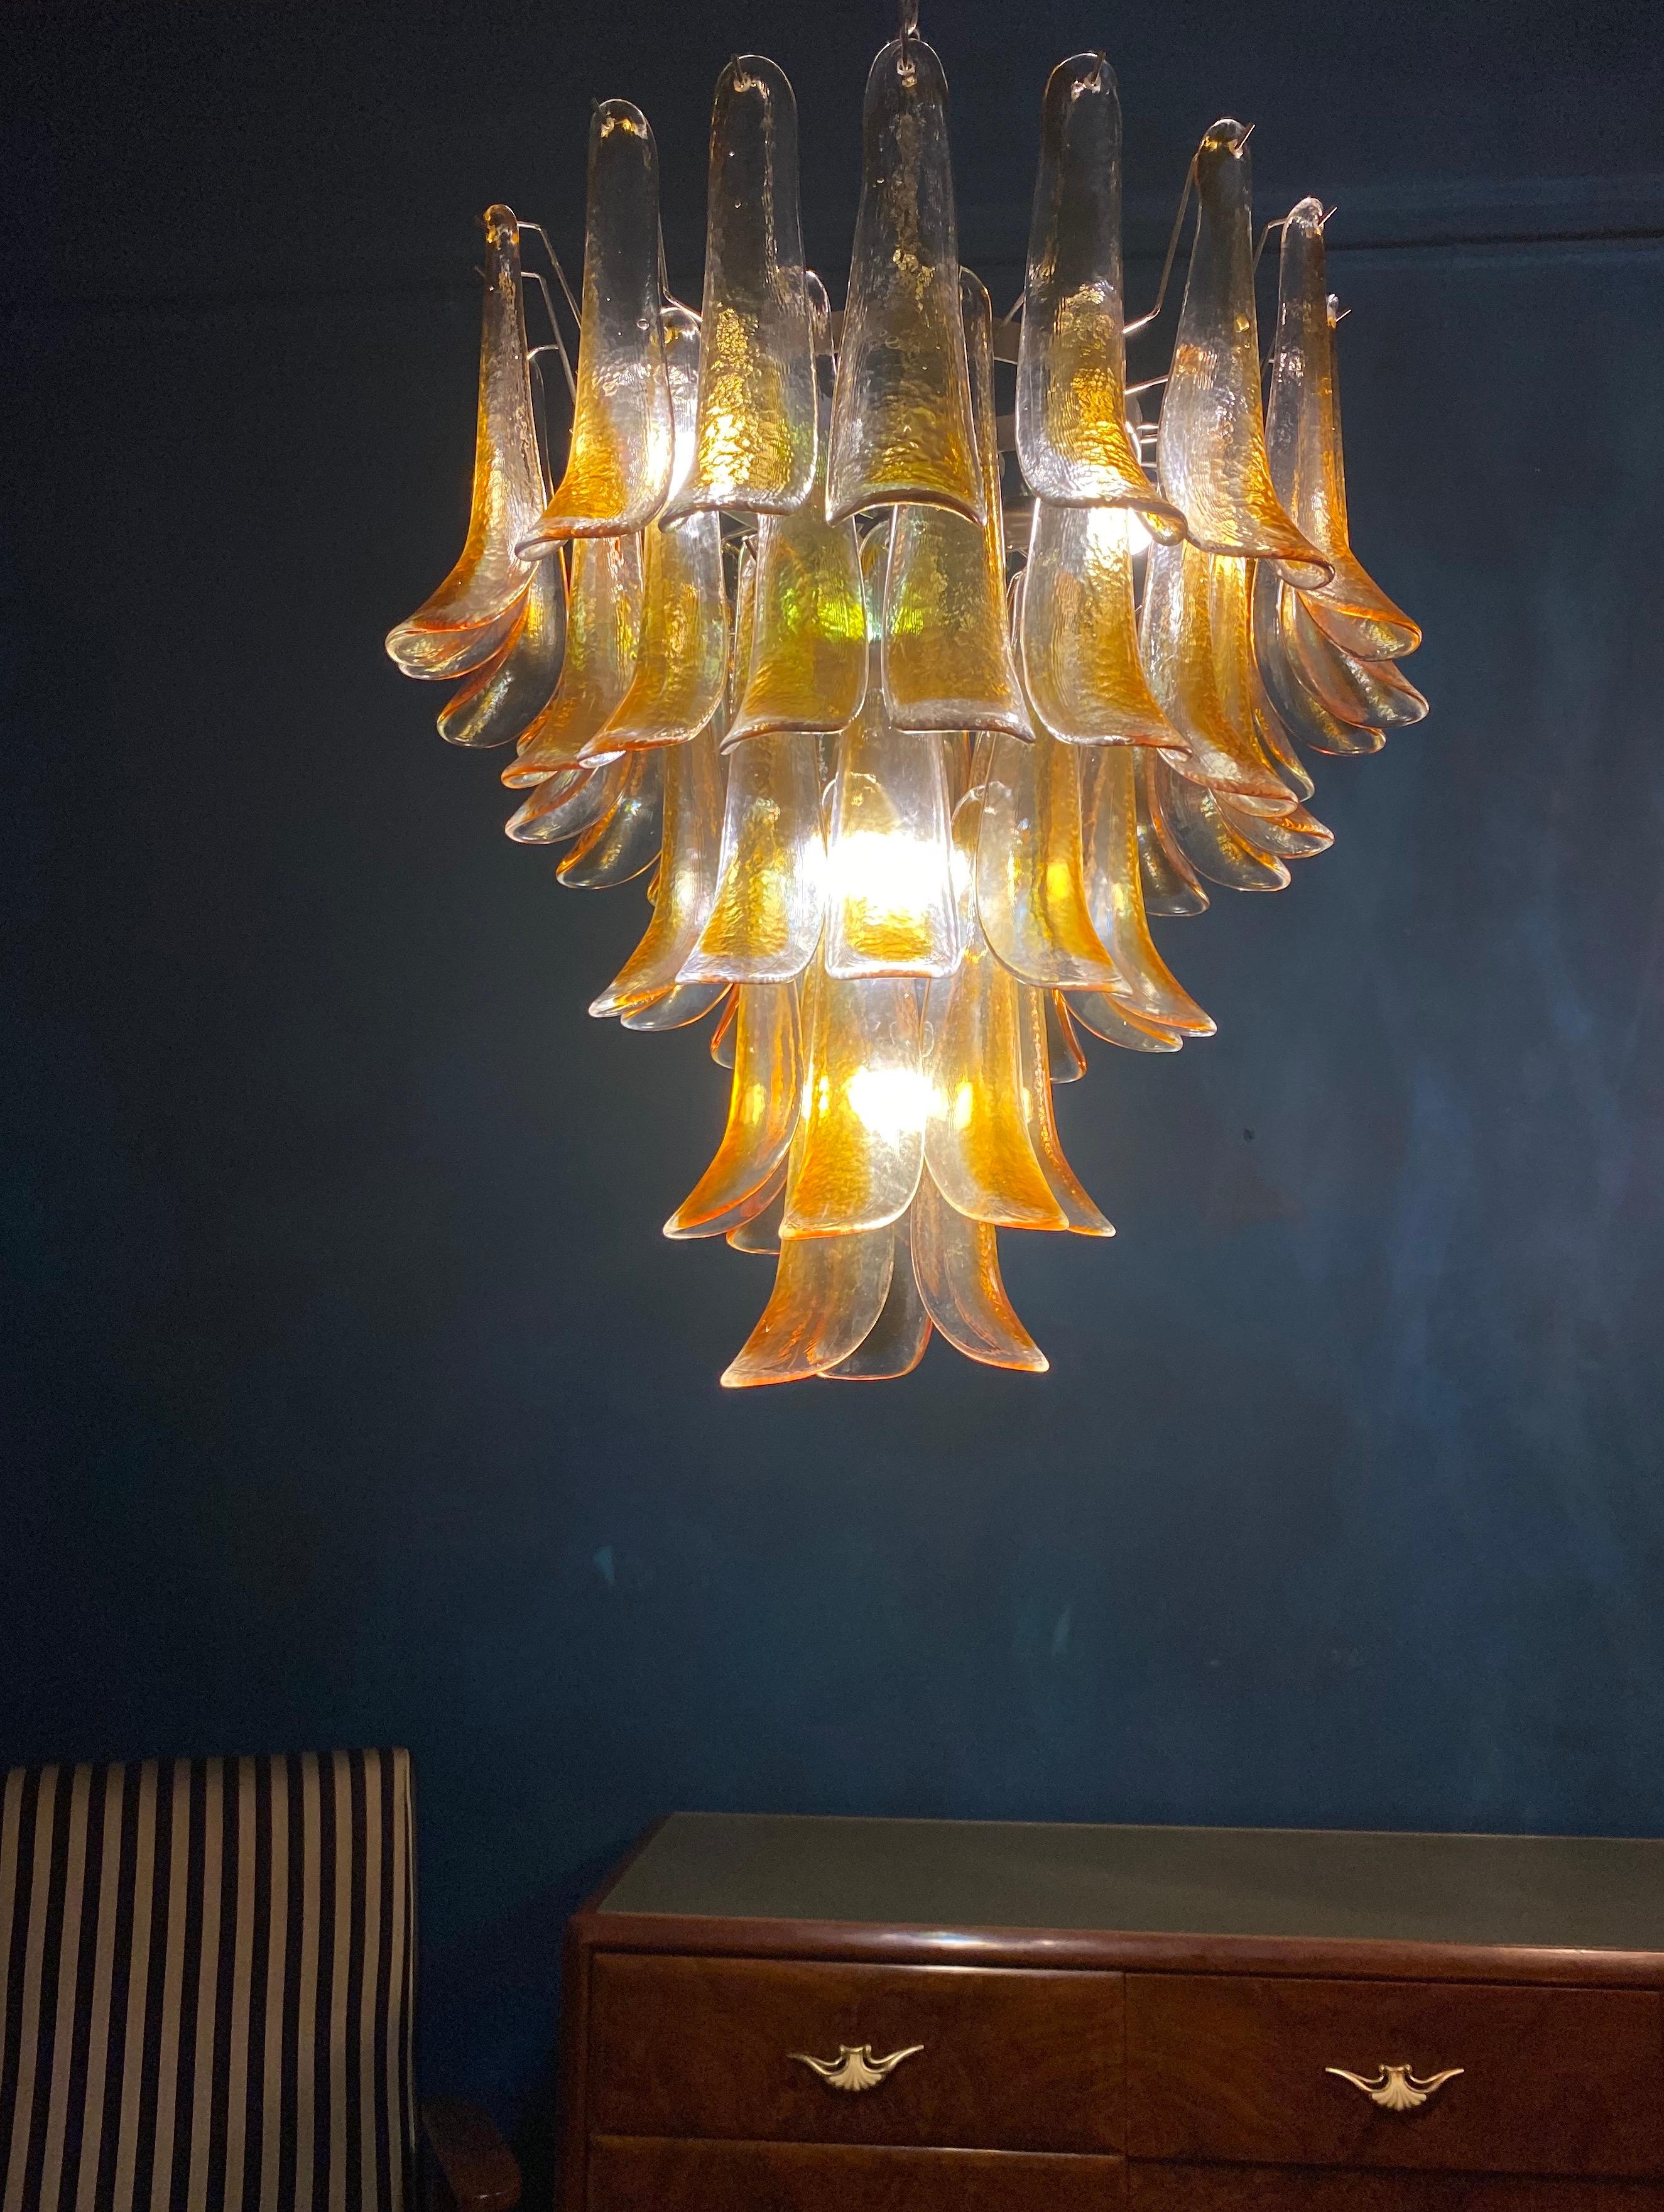 Italian vintage Murano chandelier made by 52 clear amber glass petals supported by a chrome frame.
The clear amber color of the glasses create a fabulous warm light effect.
Period: 1970s
Dimensions: 55.10 inches (140 cm) height with chain; 29.50